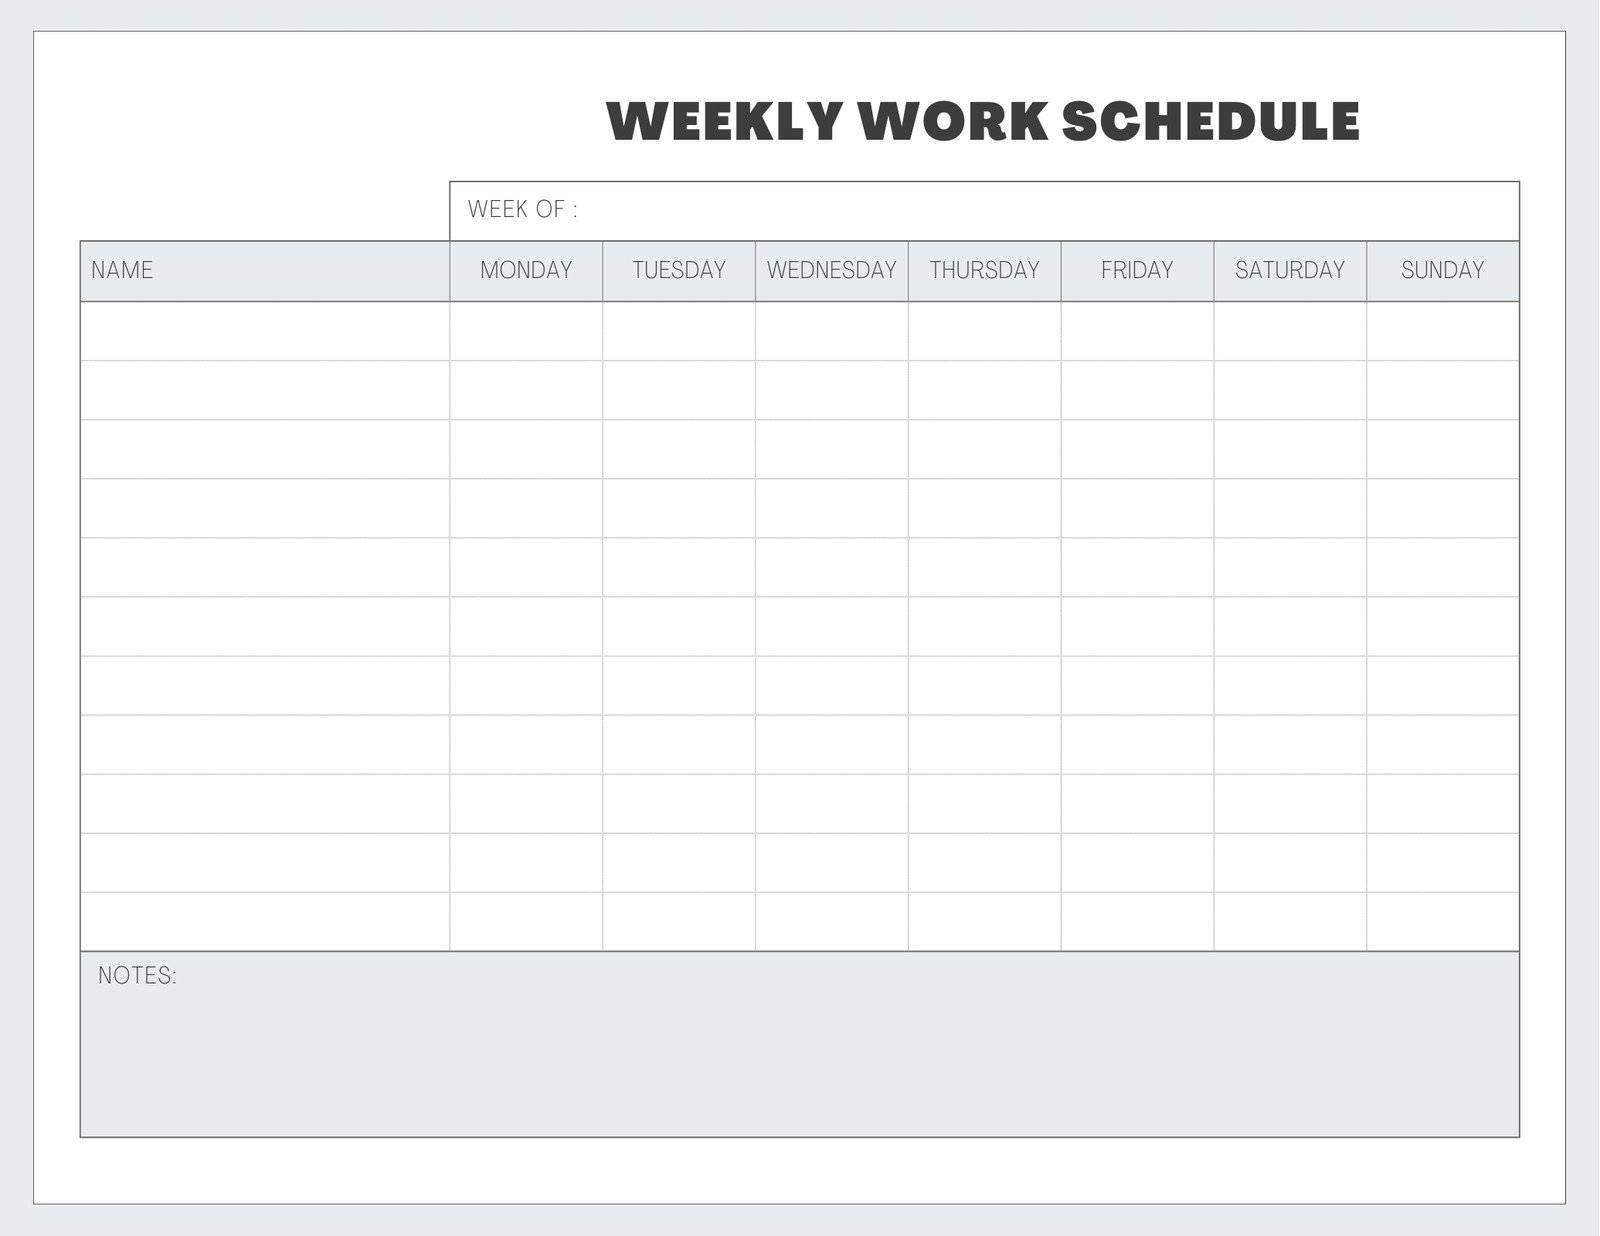 free schedule maker for work